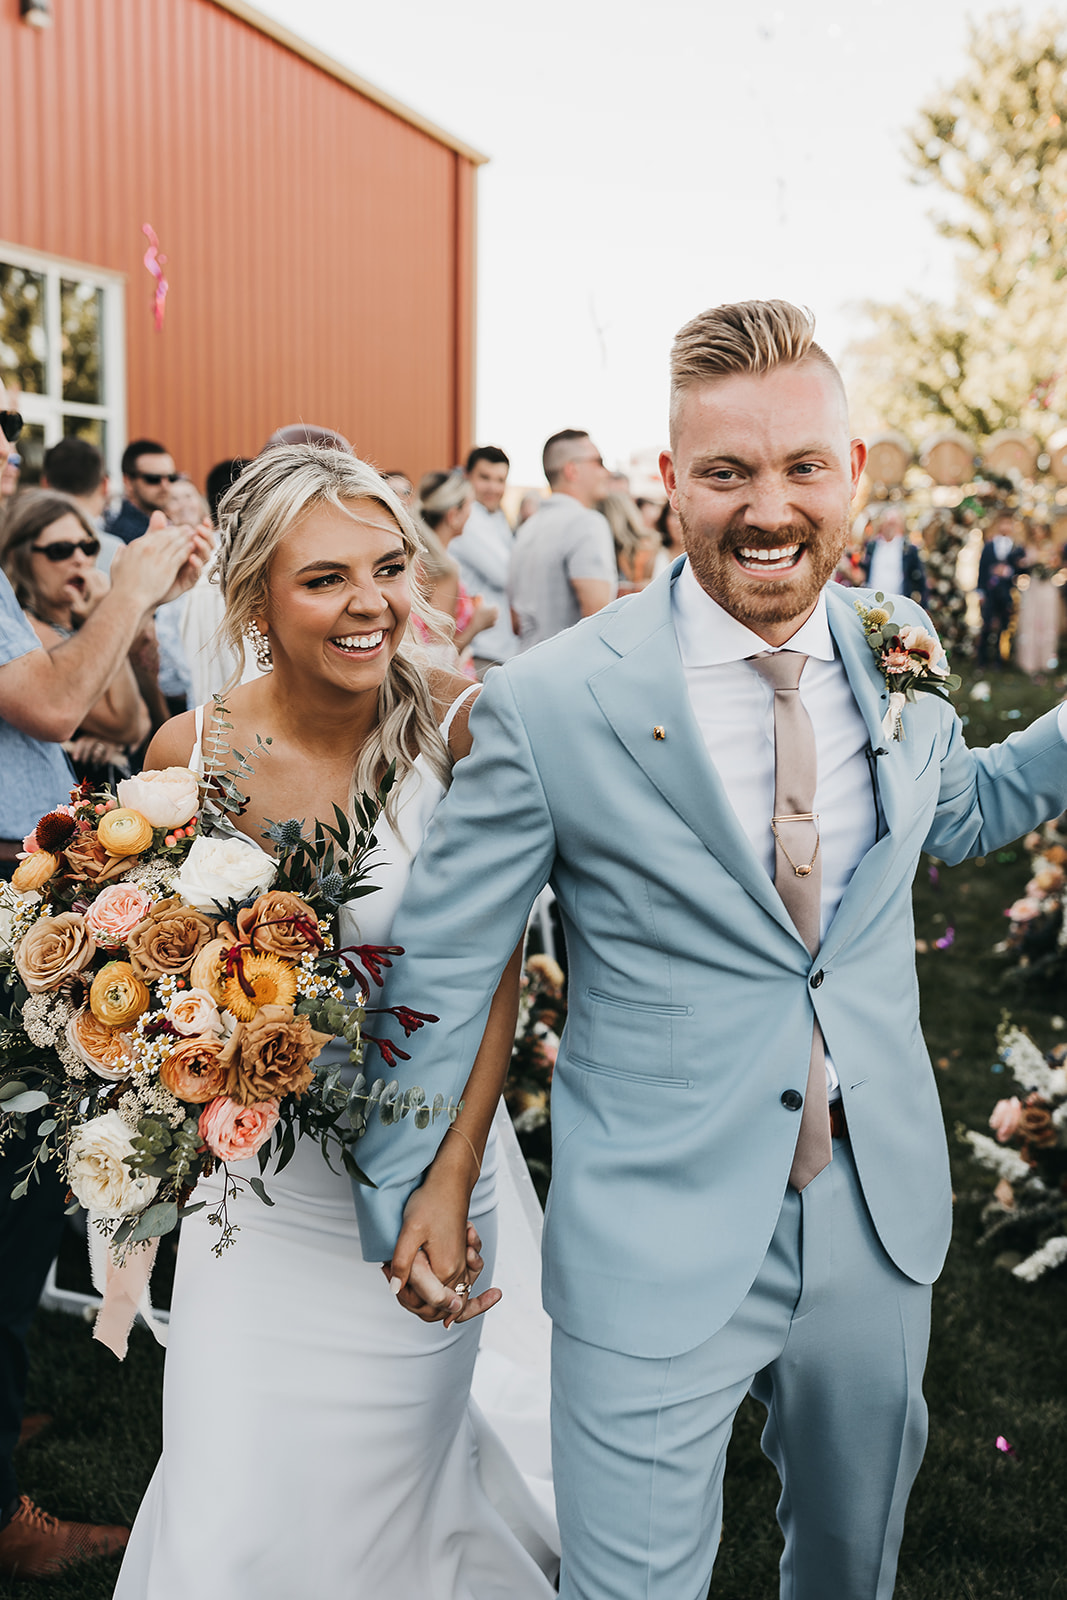 Bride and groom celebrate walking down the aisle together after saying I do